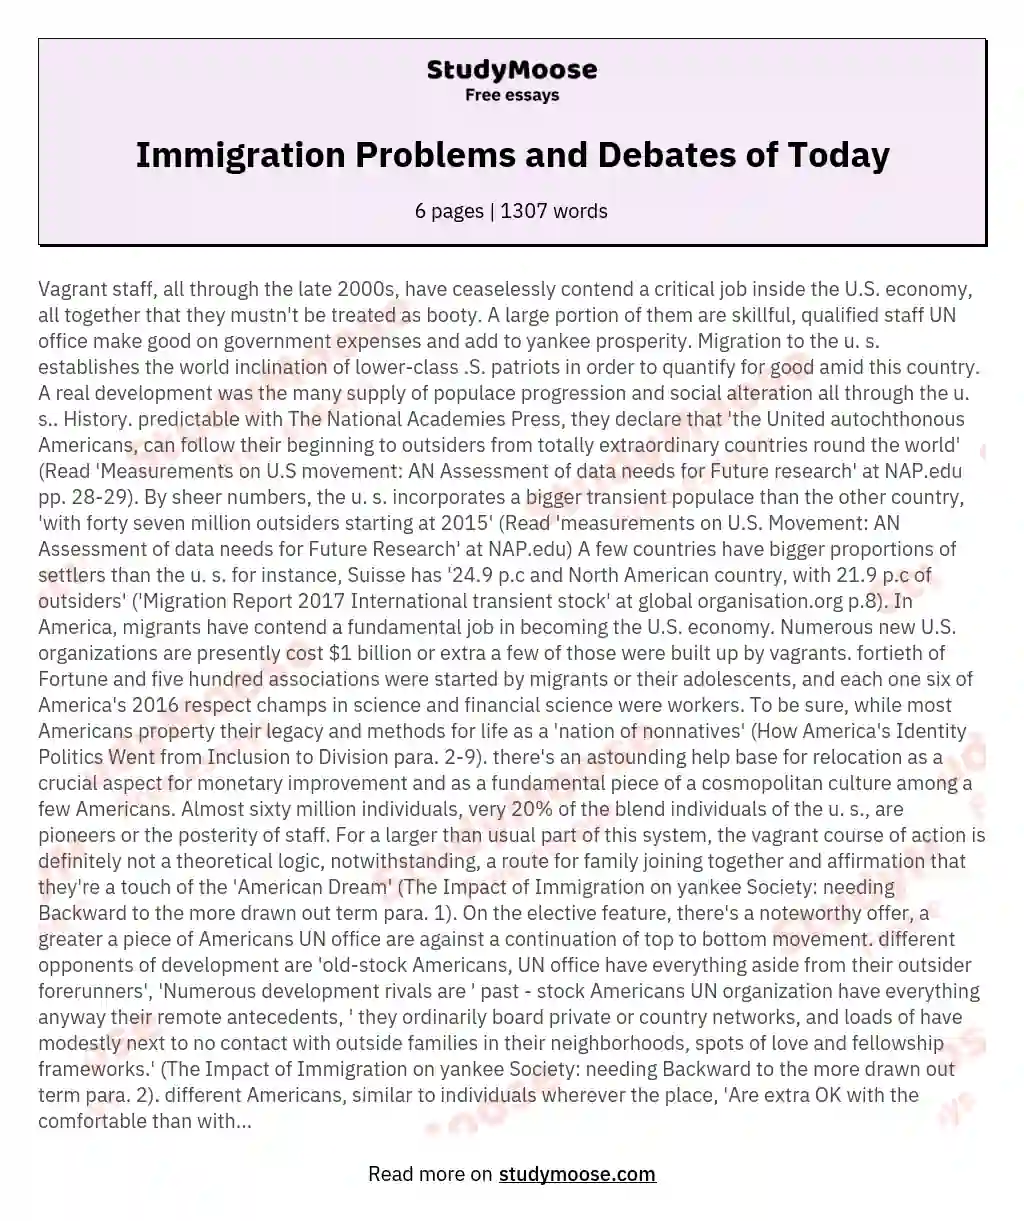 Immigration Problems and Debates of Today